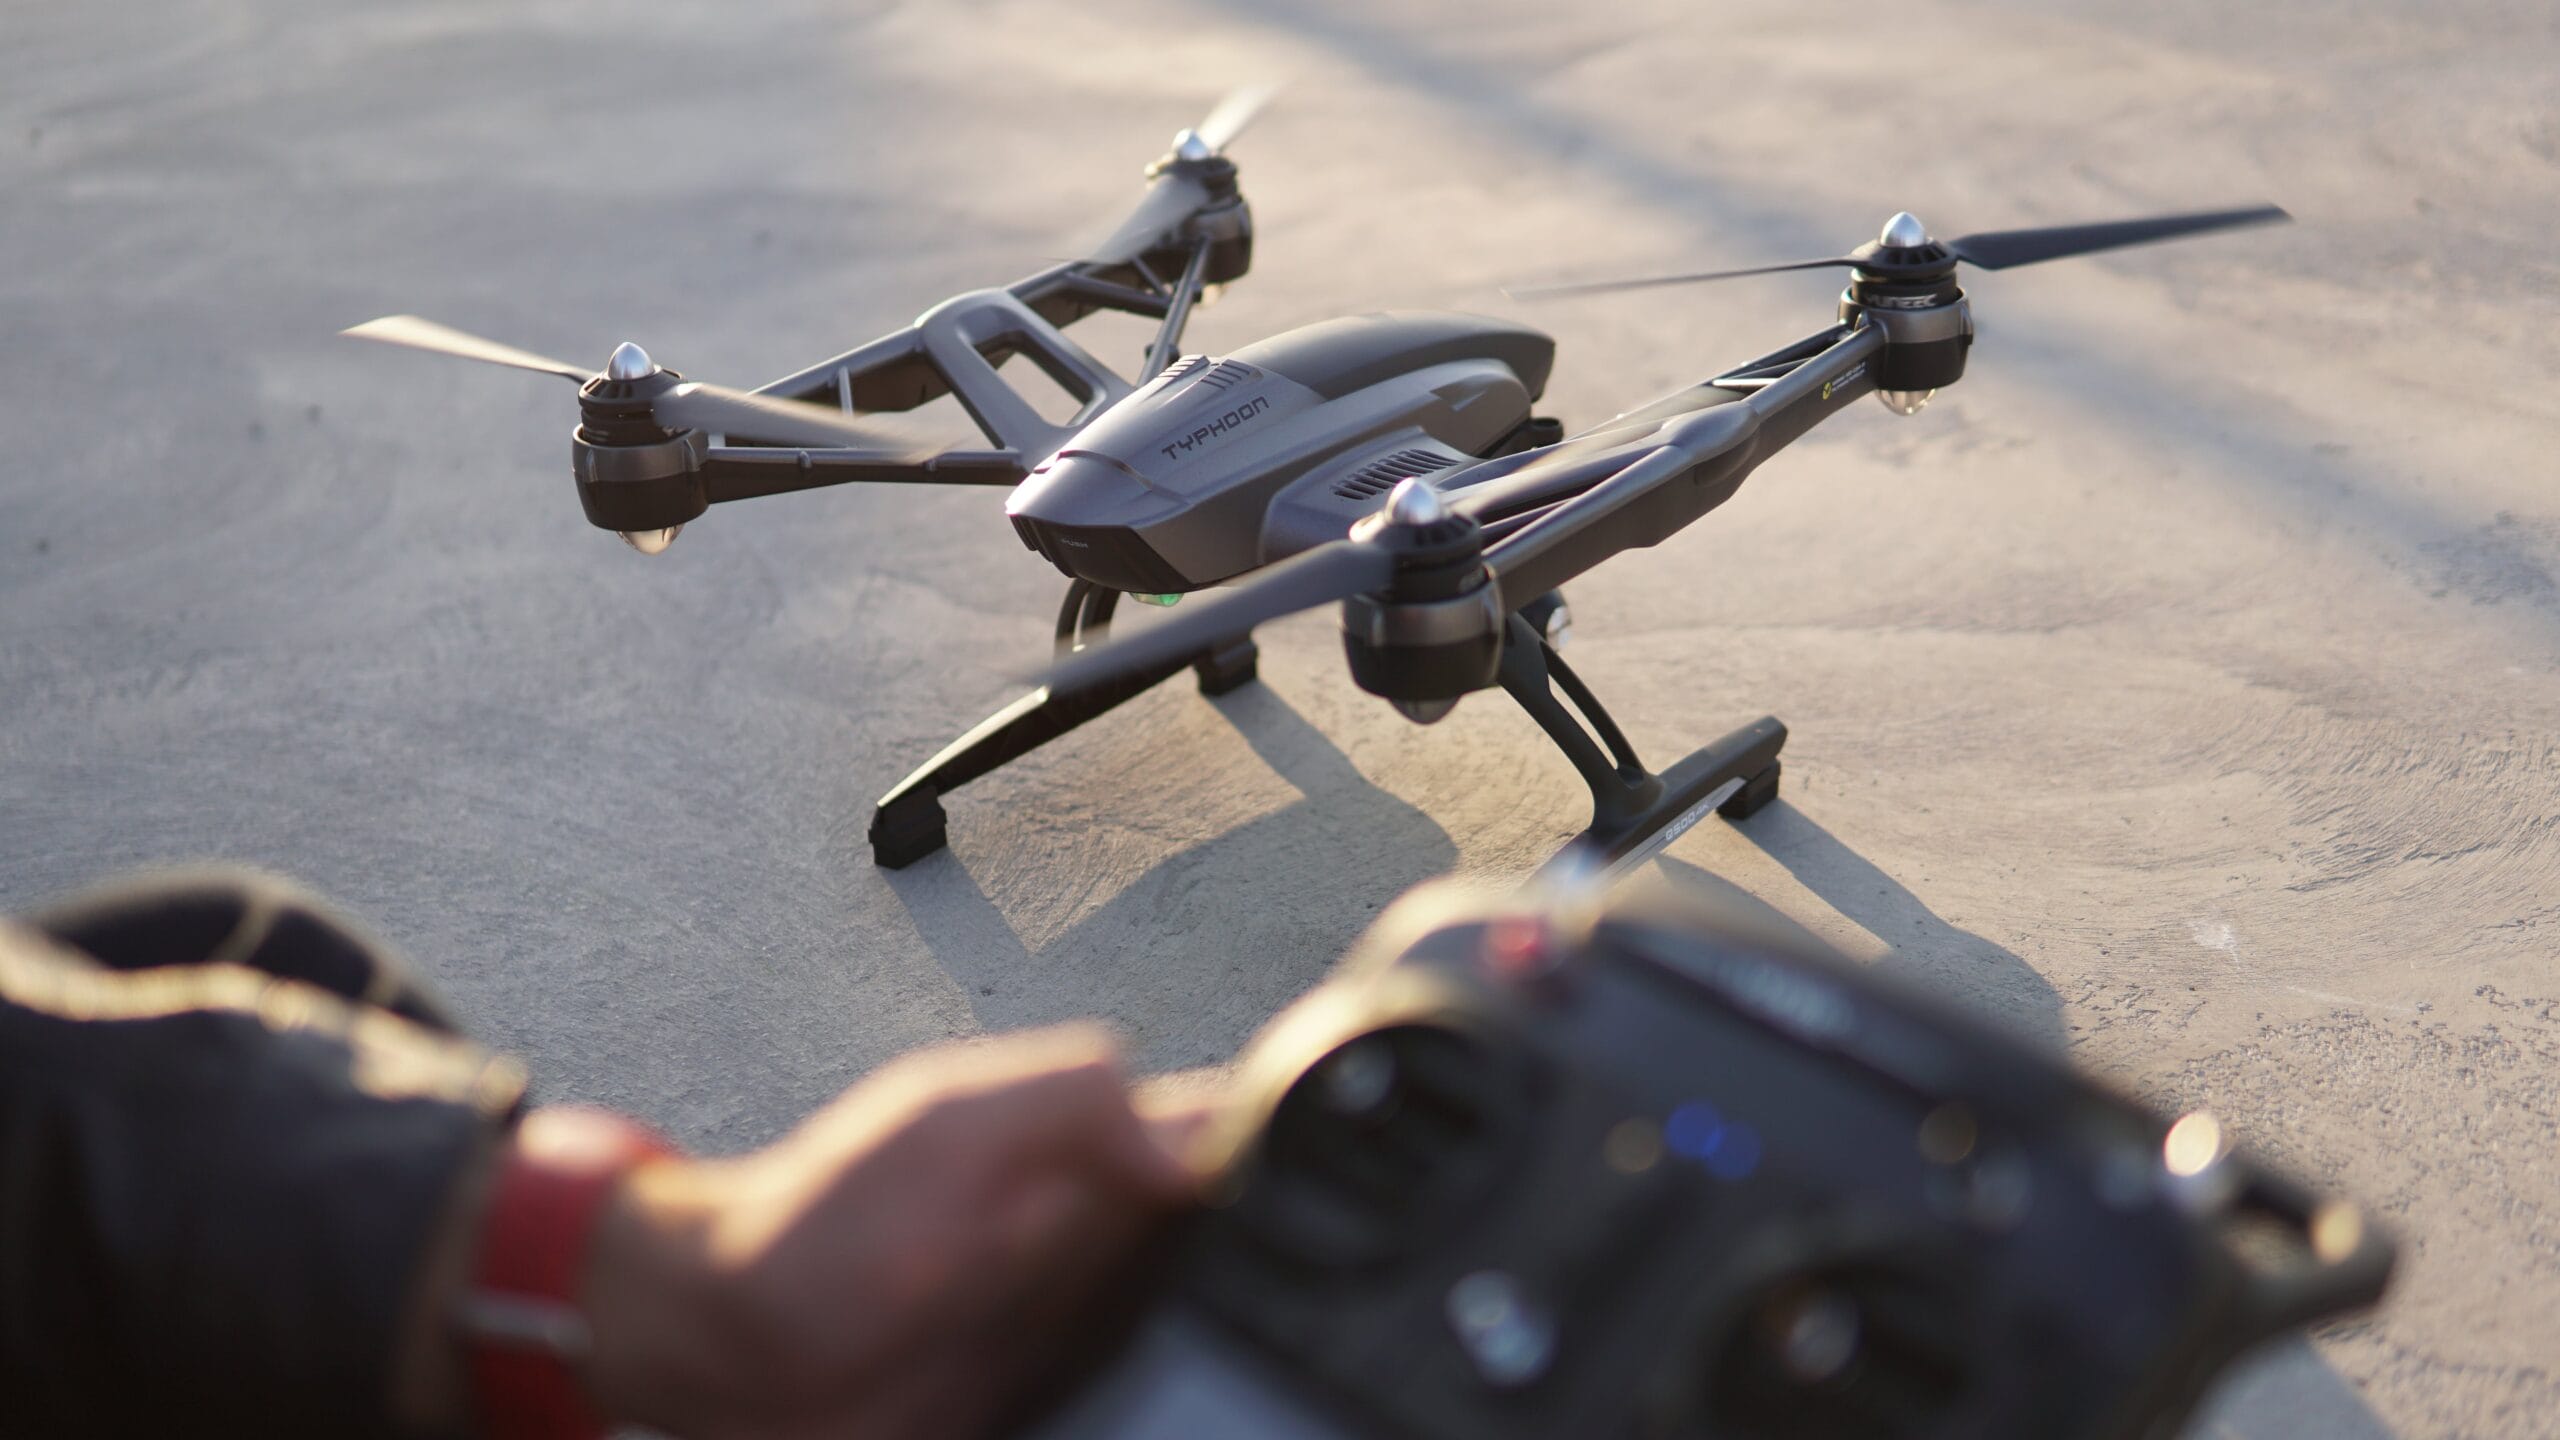 Get your Part 107 Drone License and take control of the skies with this remote control for a small drone.